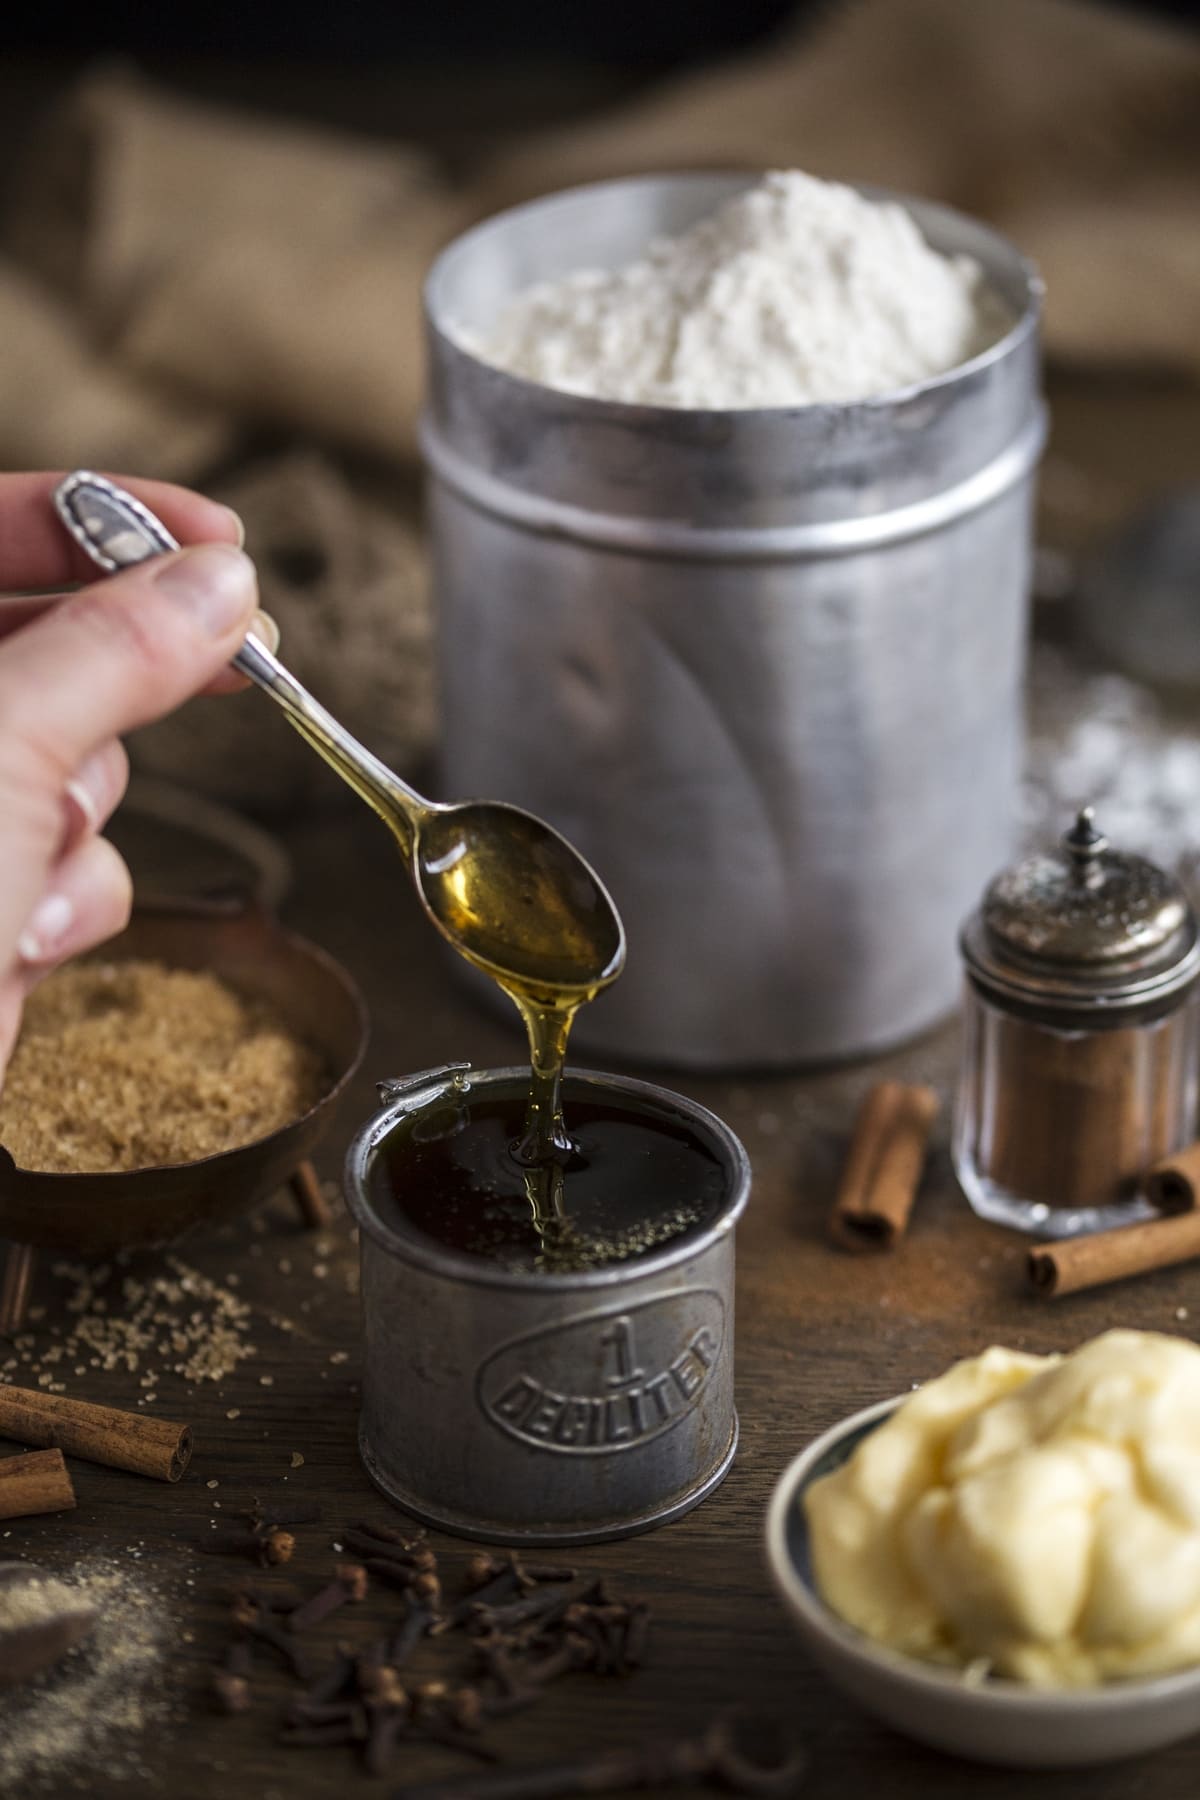 Hand lifting a teaspoon from a container with syrup, other recipe ingredients placed around it.